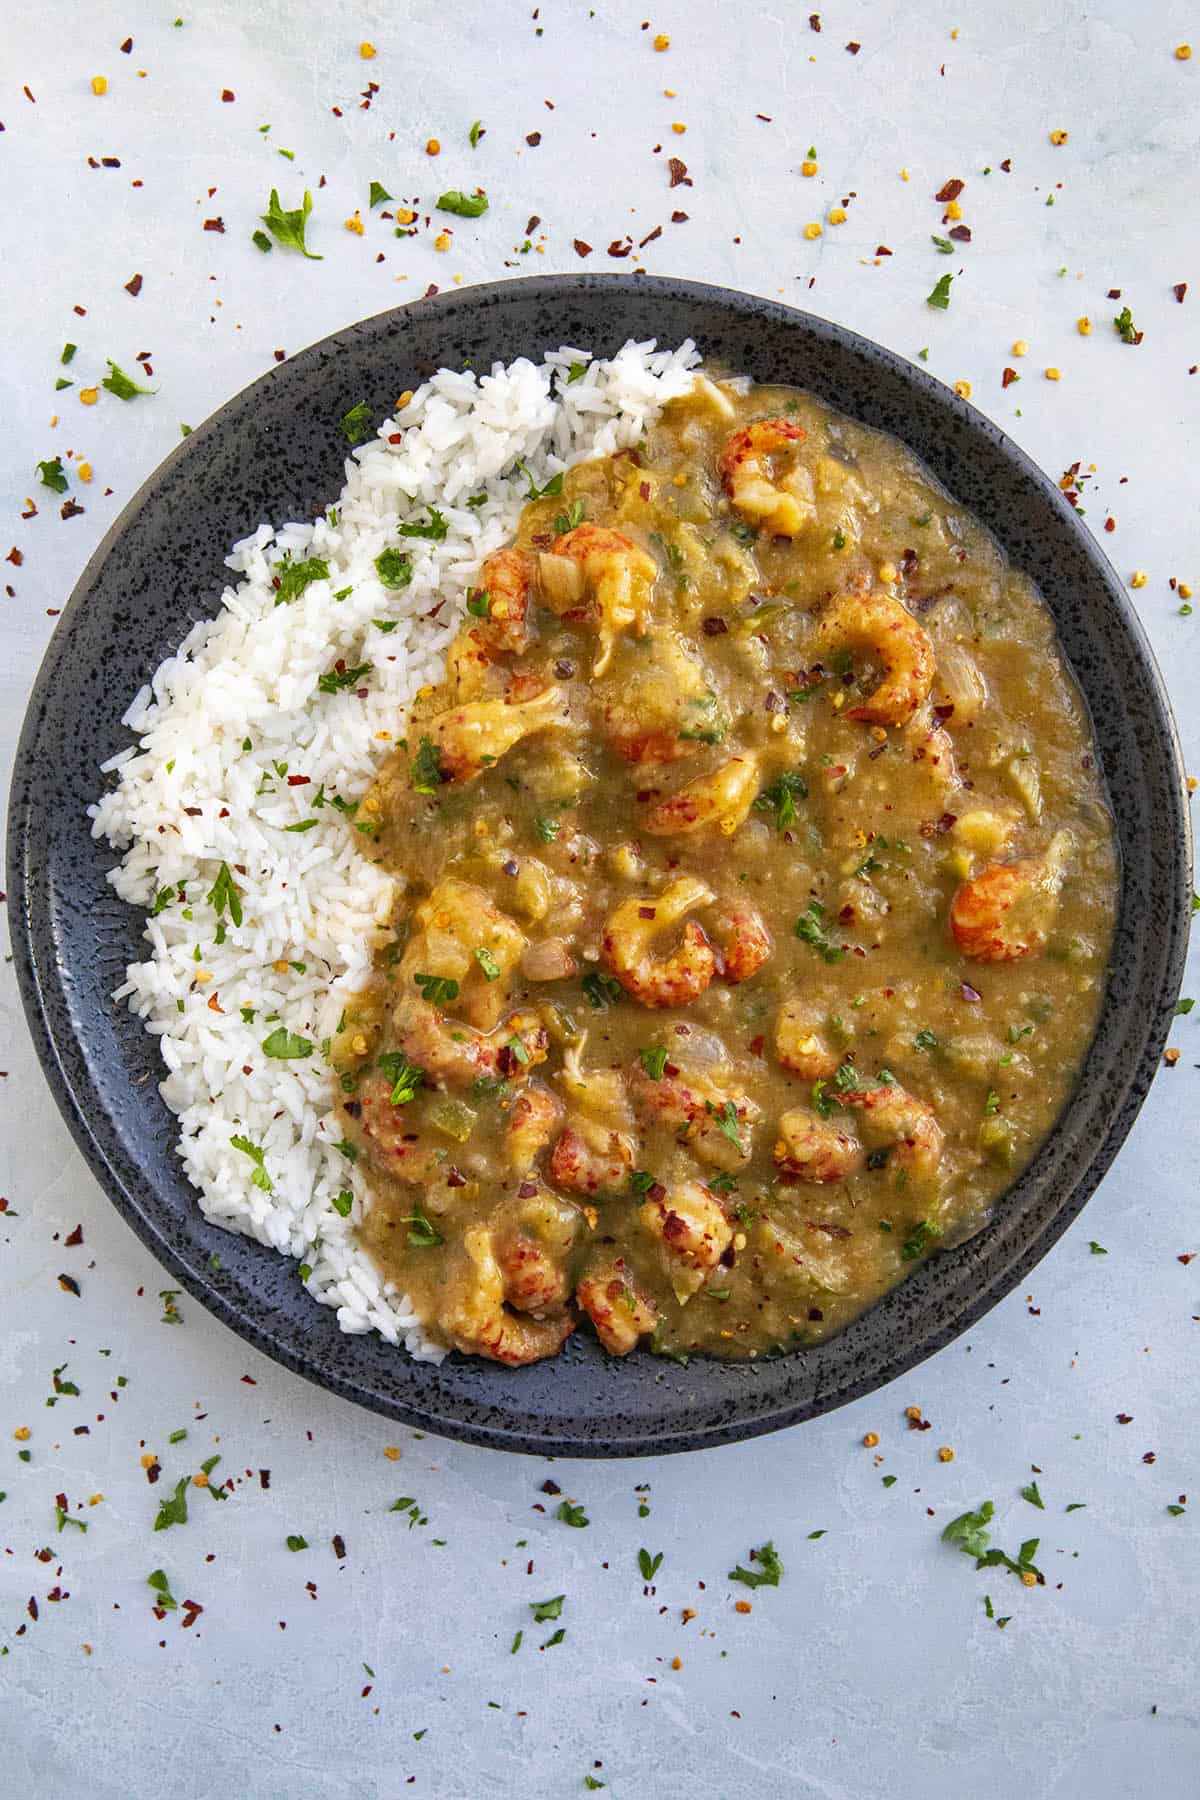 Crawfish Etouffee over white rice with lots of chunky crawfish tails